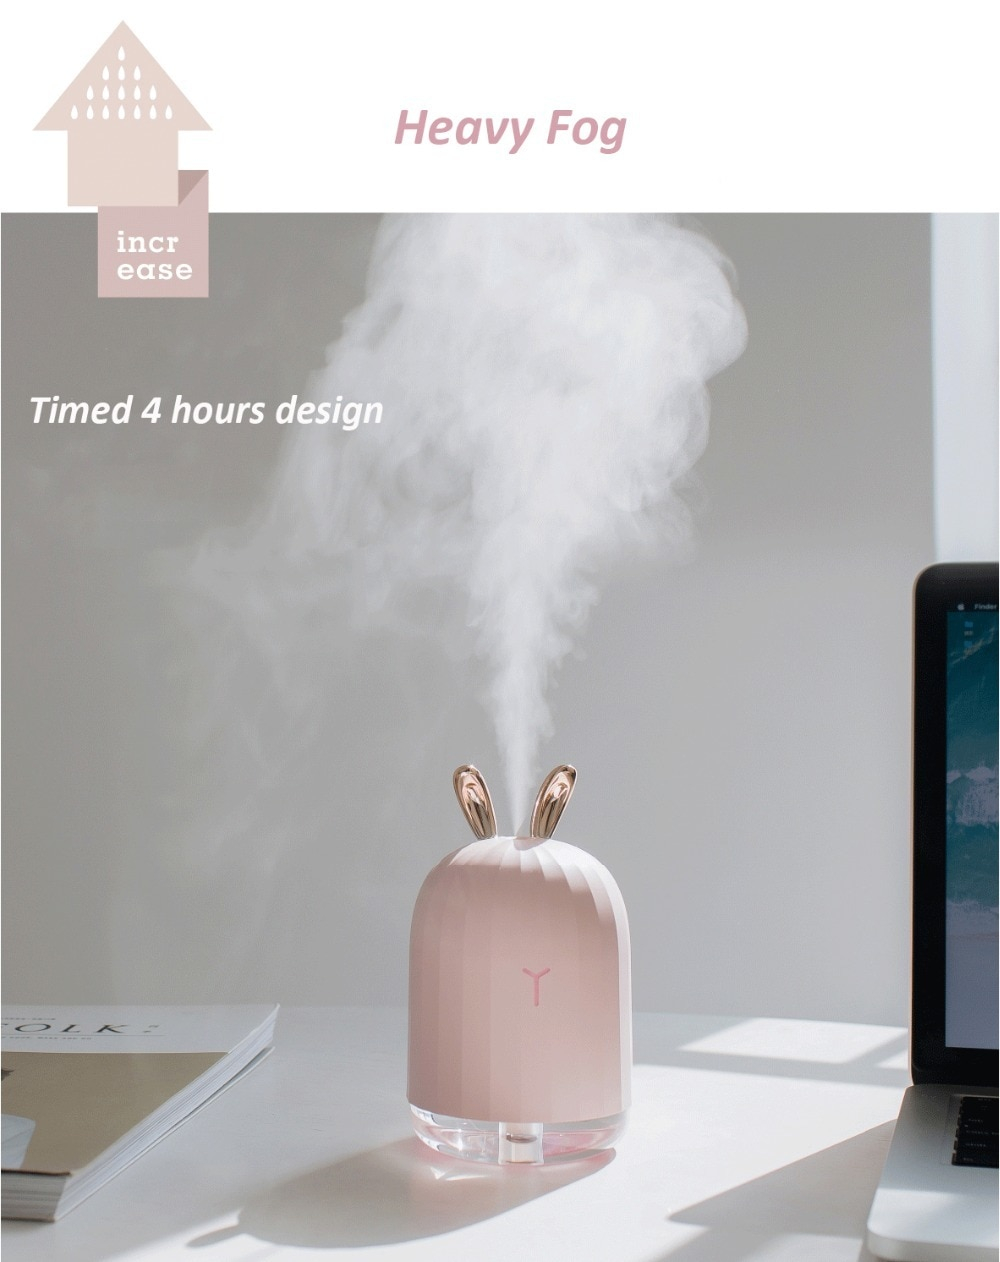 Ultrasonic Air Humidifier / Diffuser with Antlers / Ears